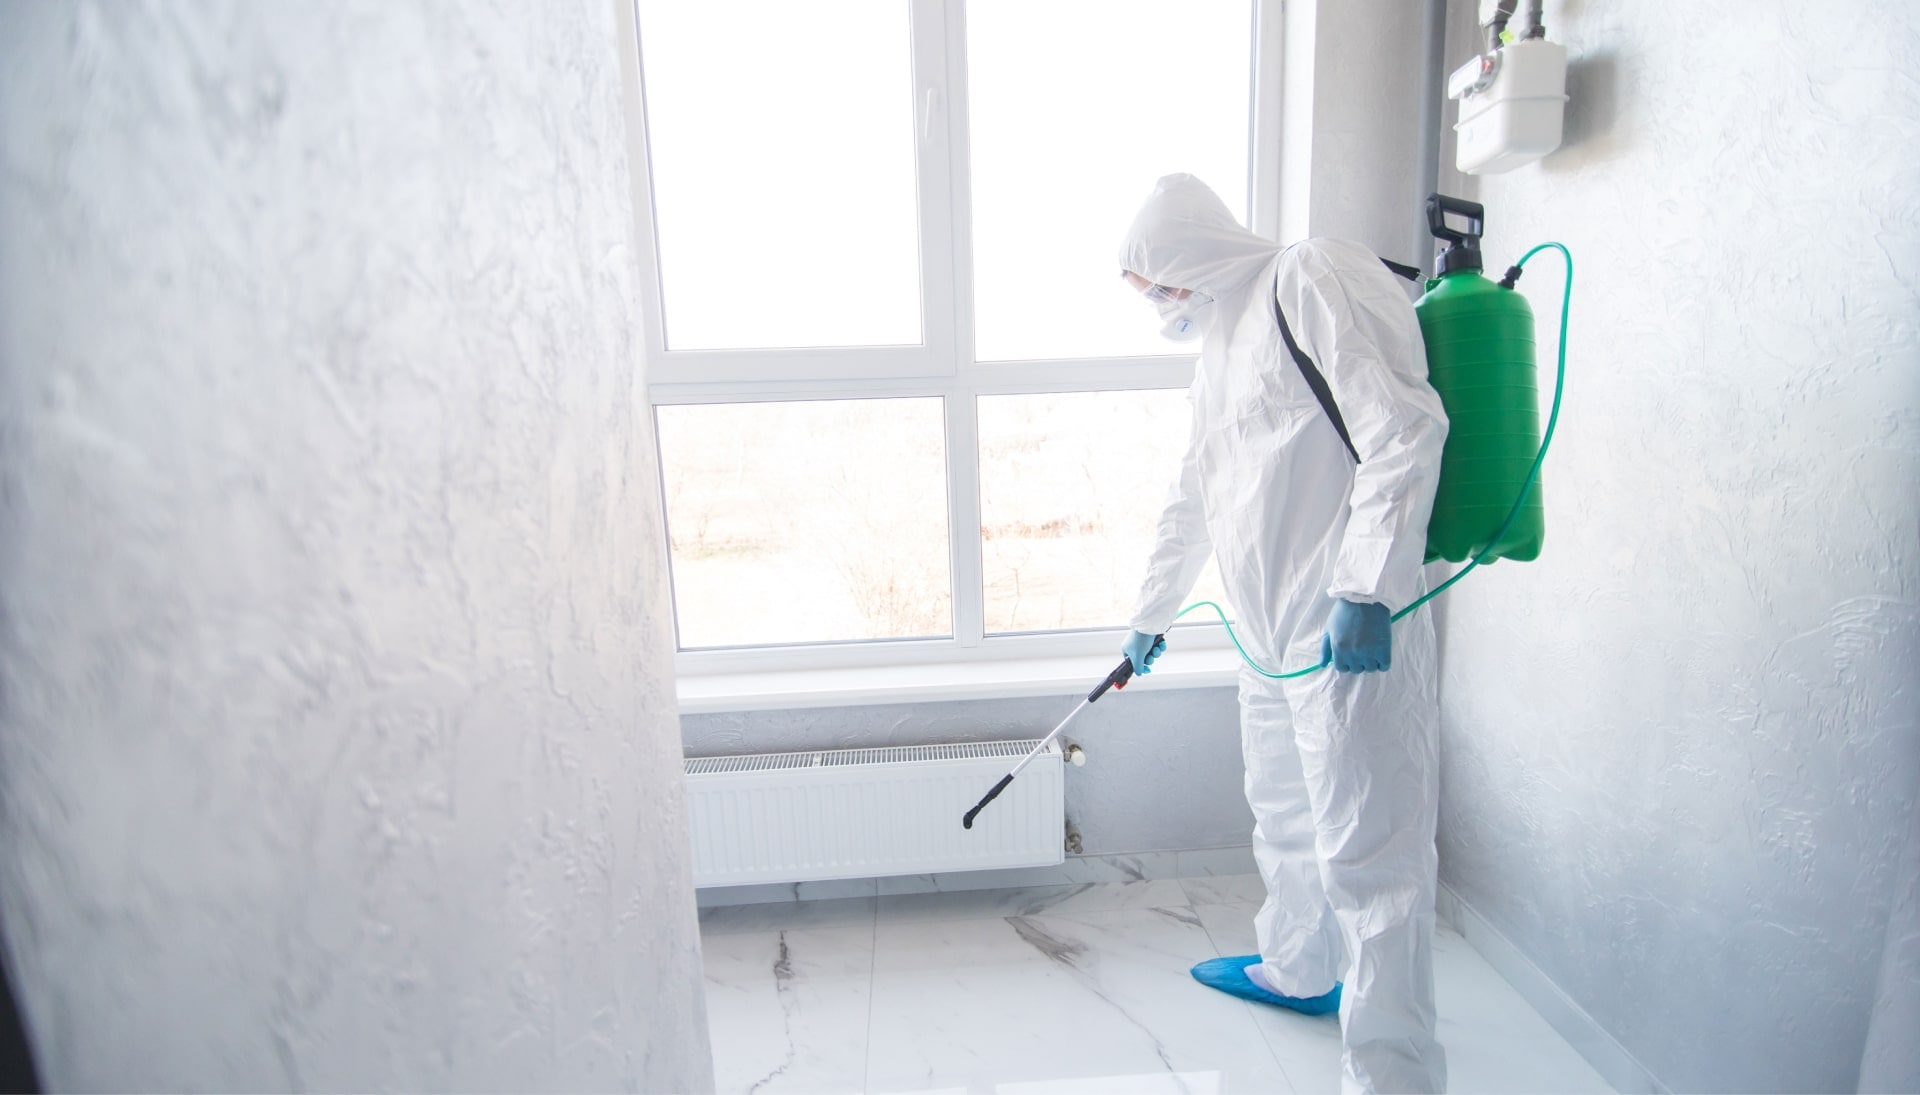 We provide the highest-quality mold inspection, testing, and removal services in the Oakwood, Ohio area.